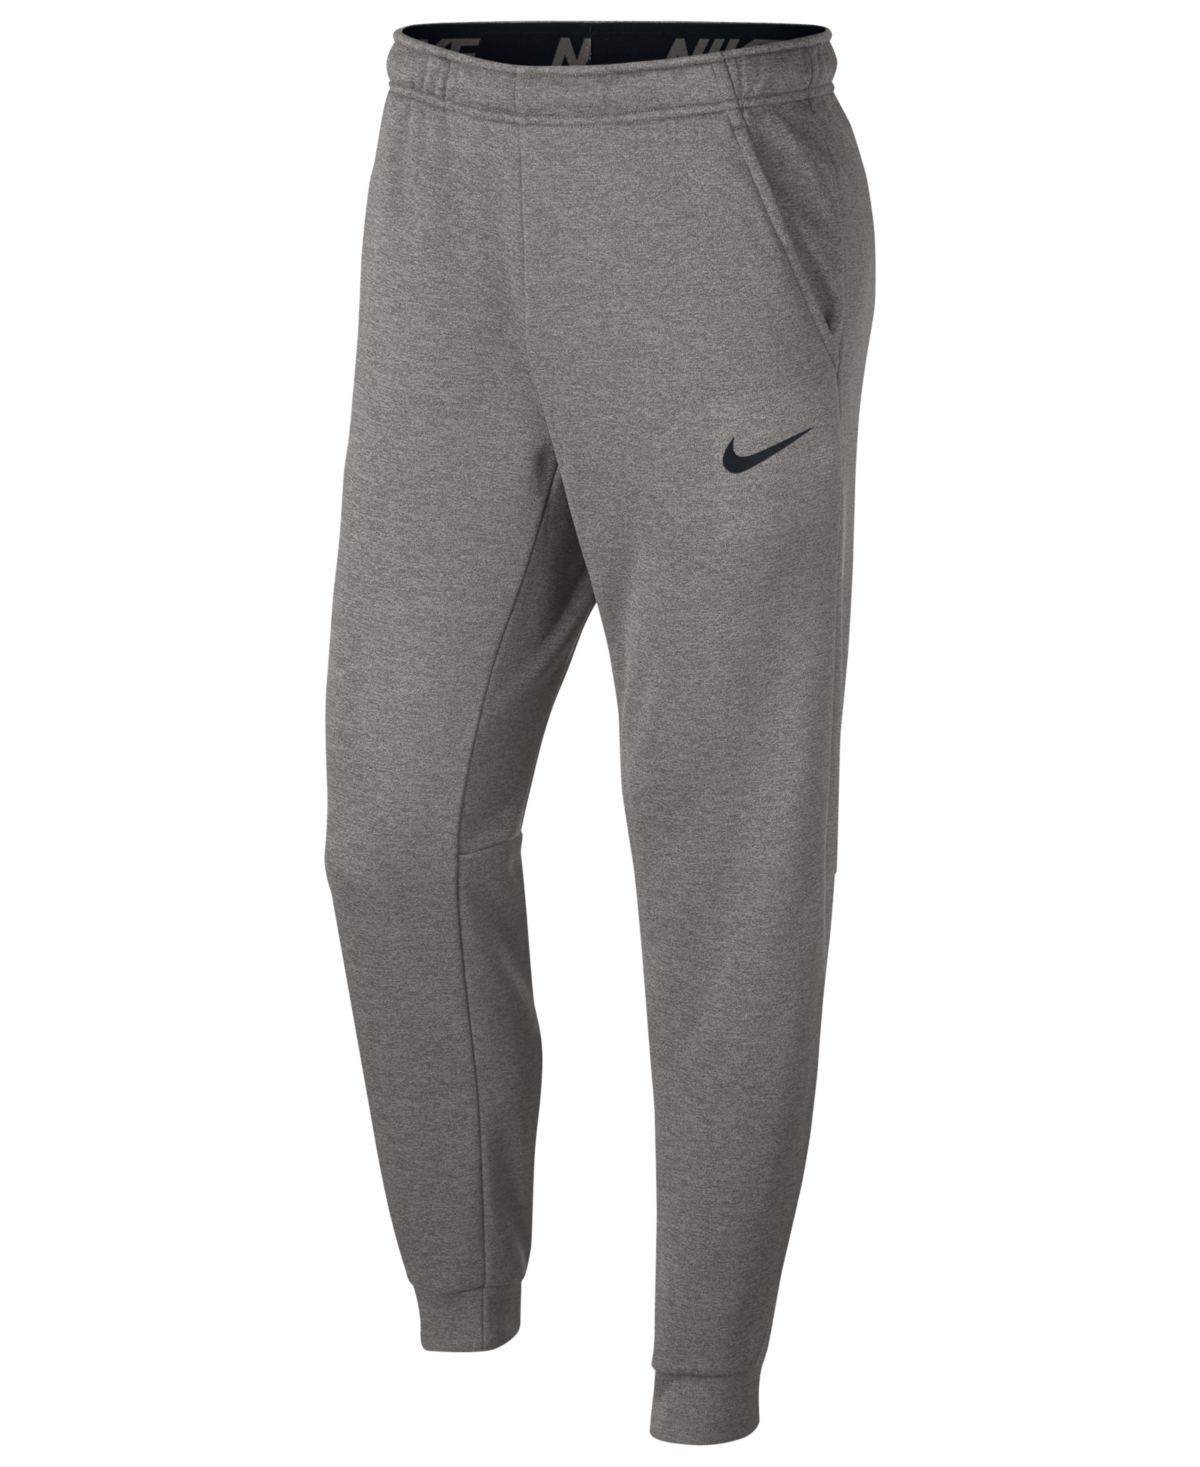 UPC 191884005769 product image for Nike Men's Therma Tapered Training Pants | upcitemdb.com